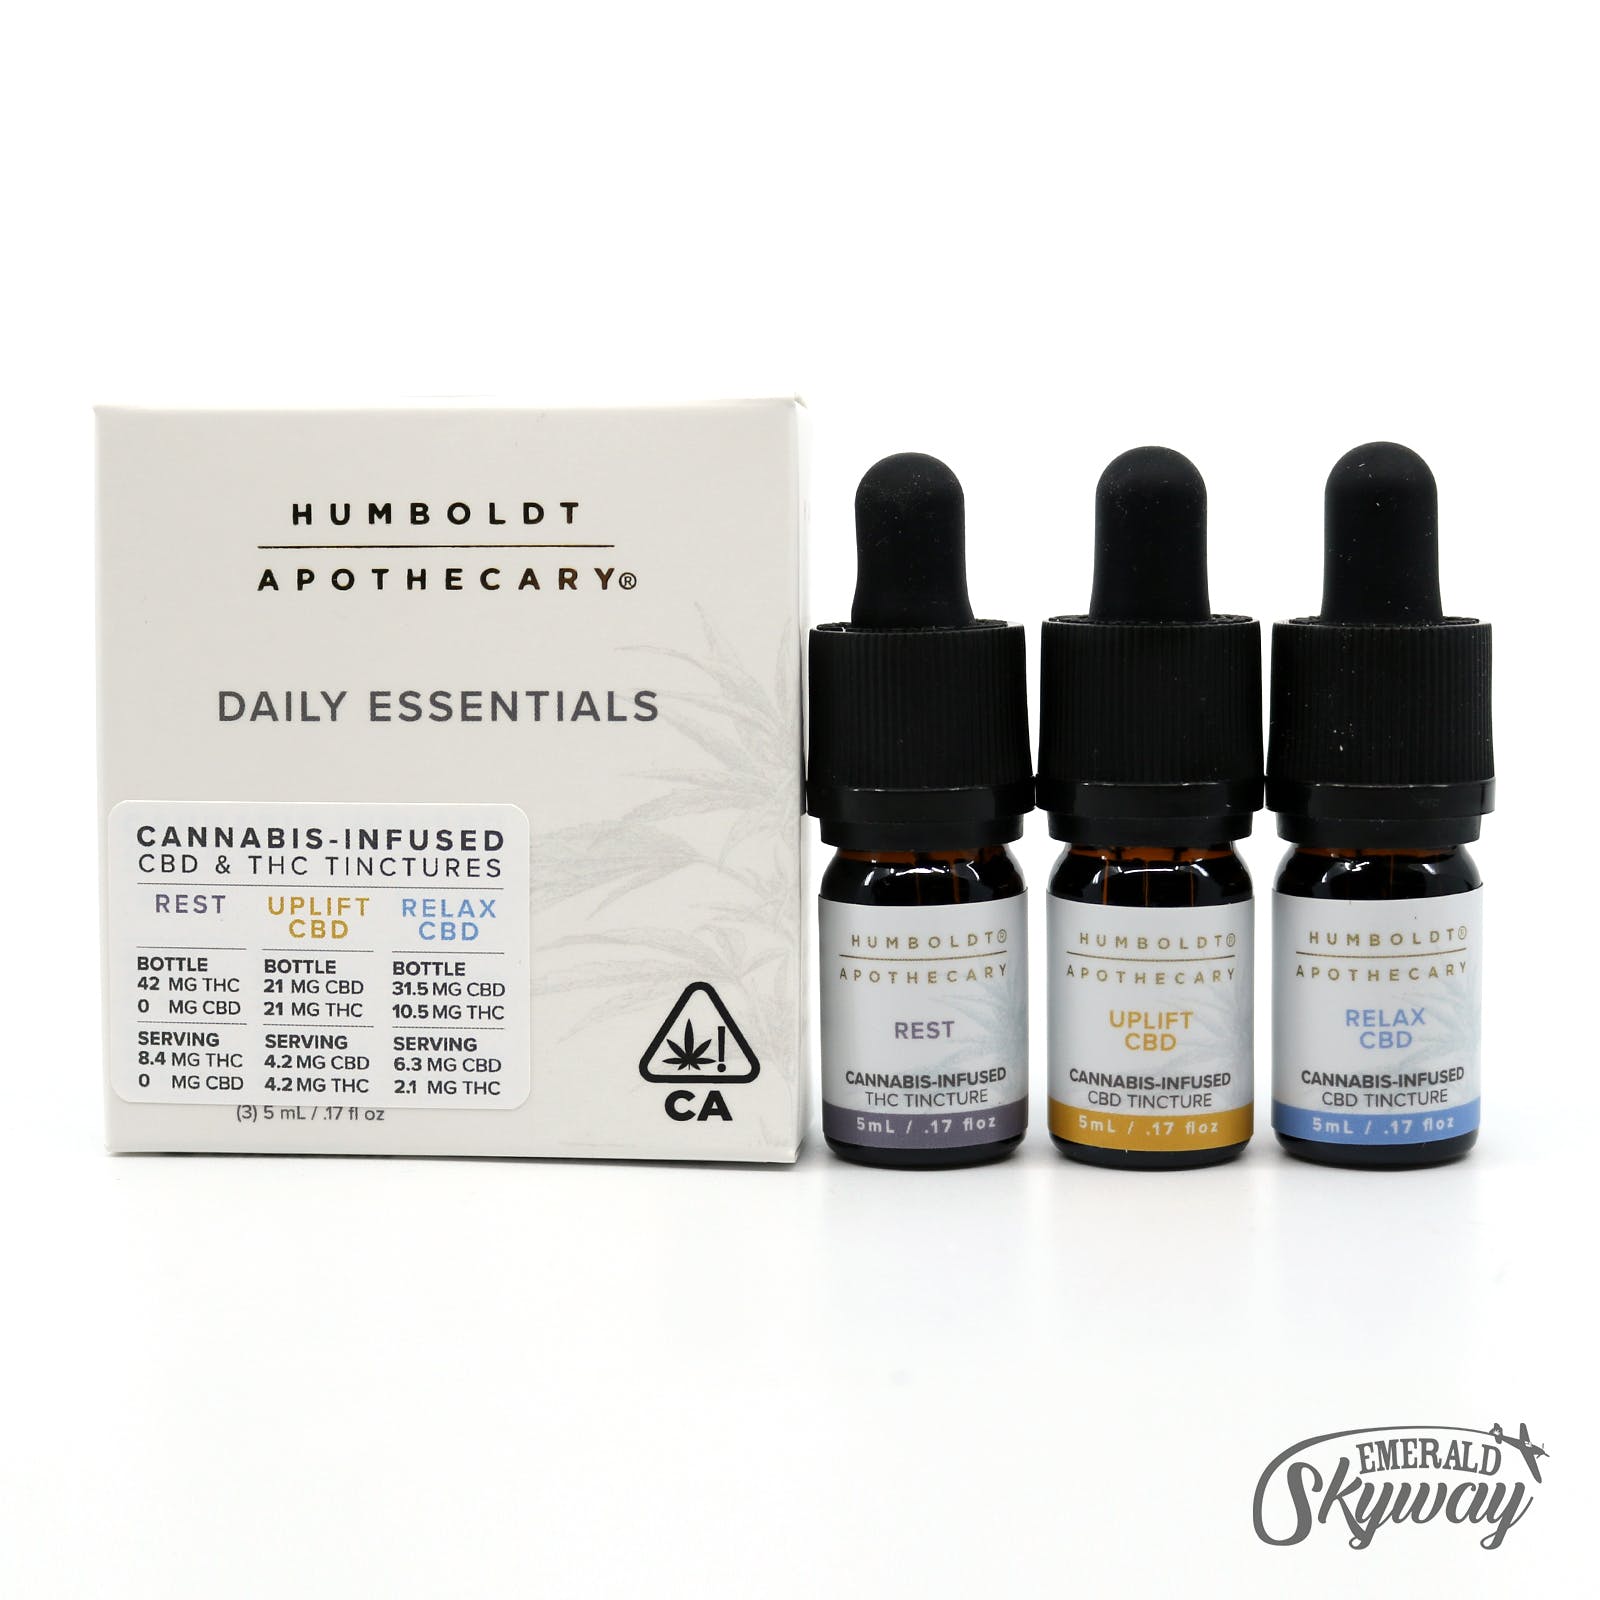 Humboldt Apothecary: Daily Essentials